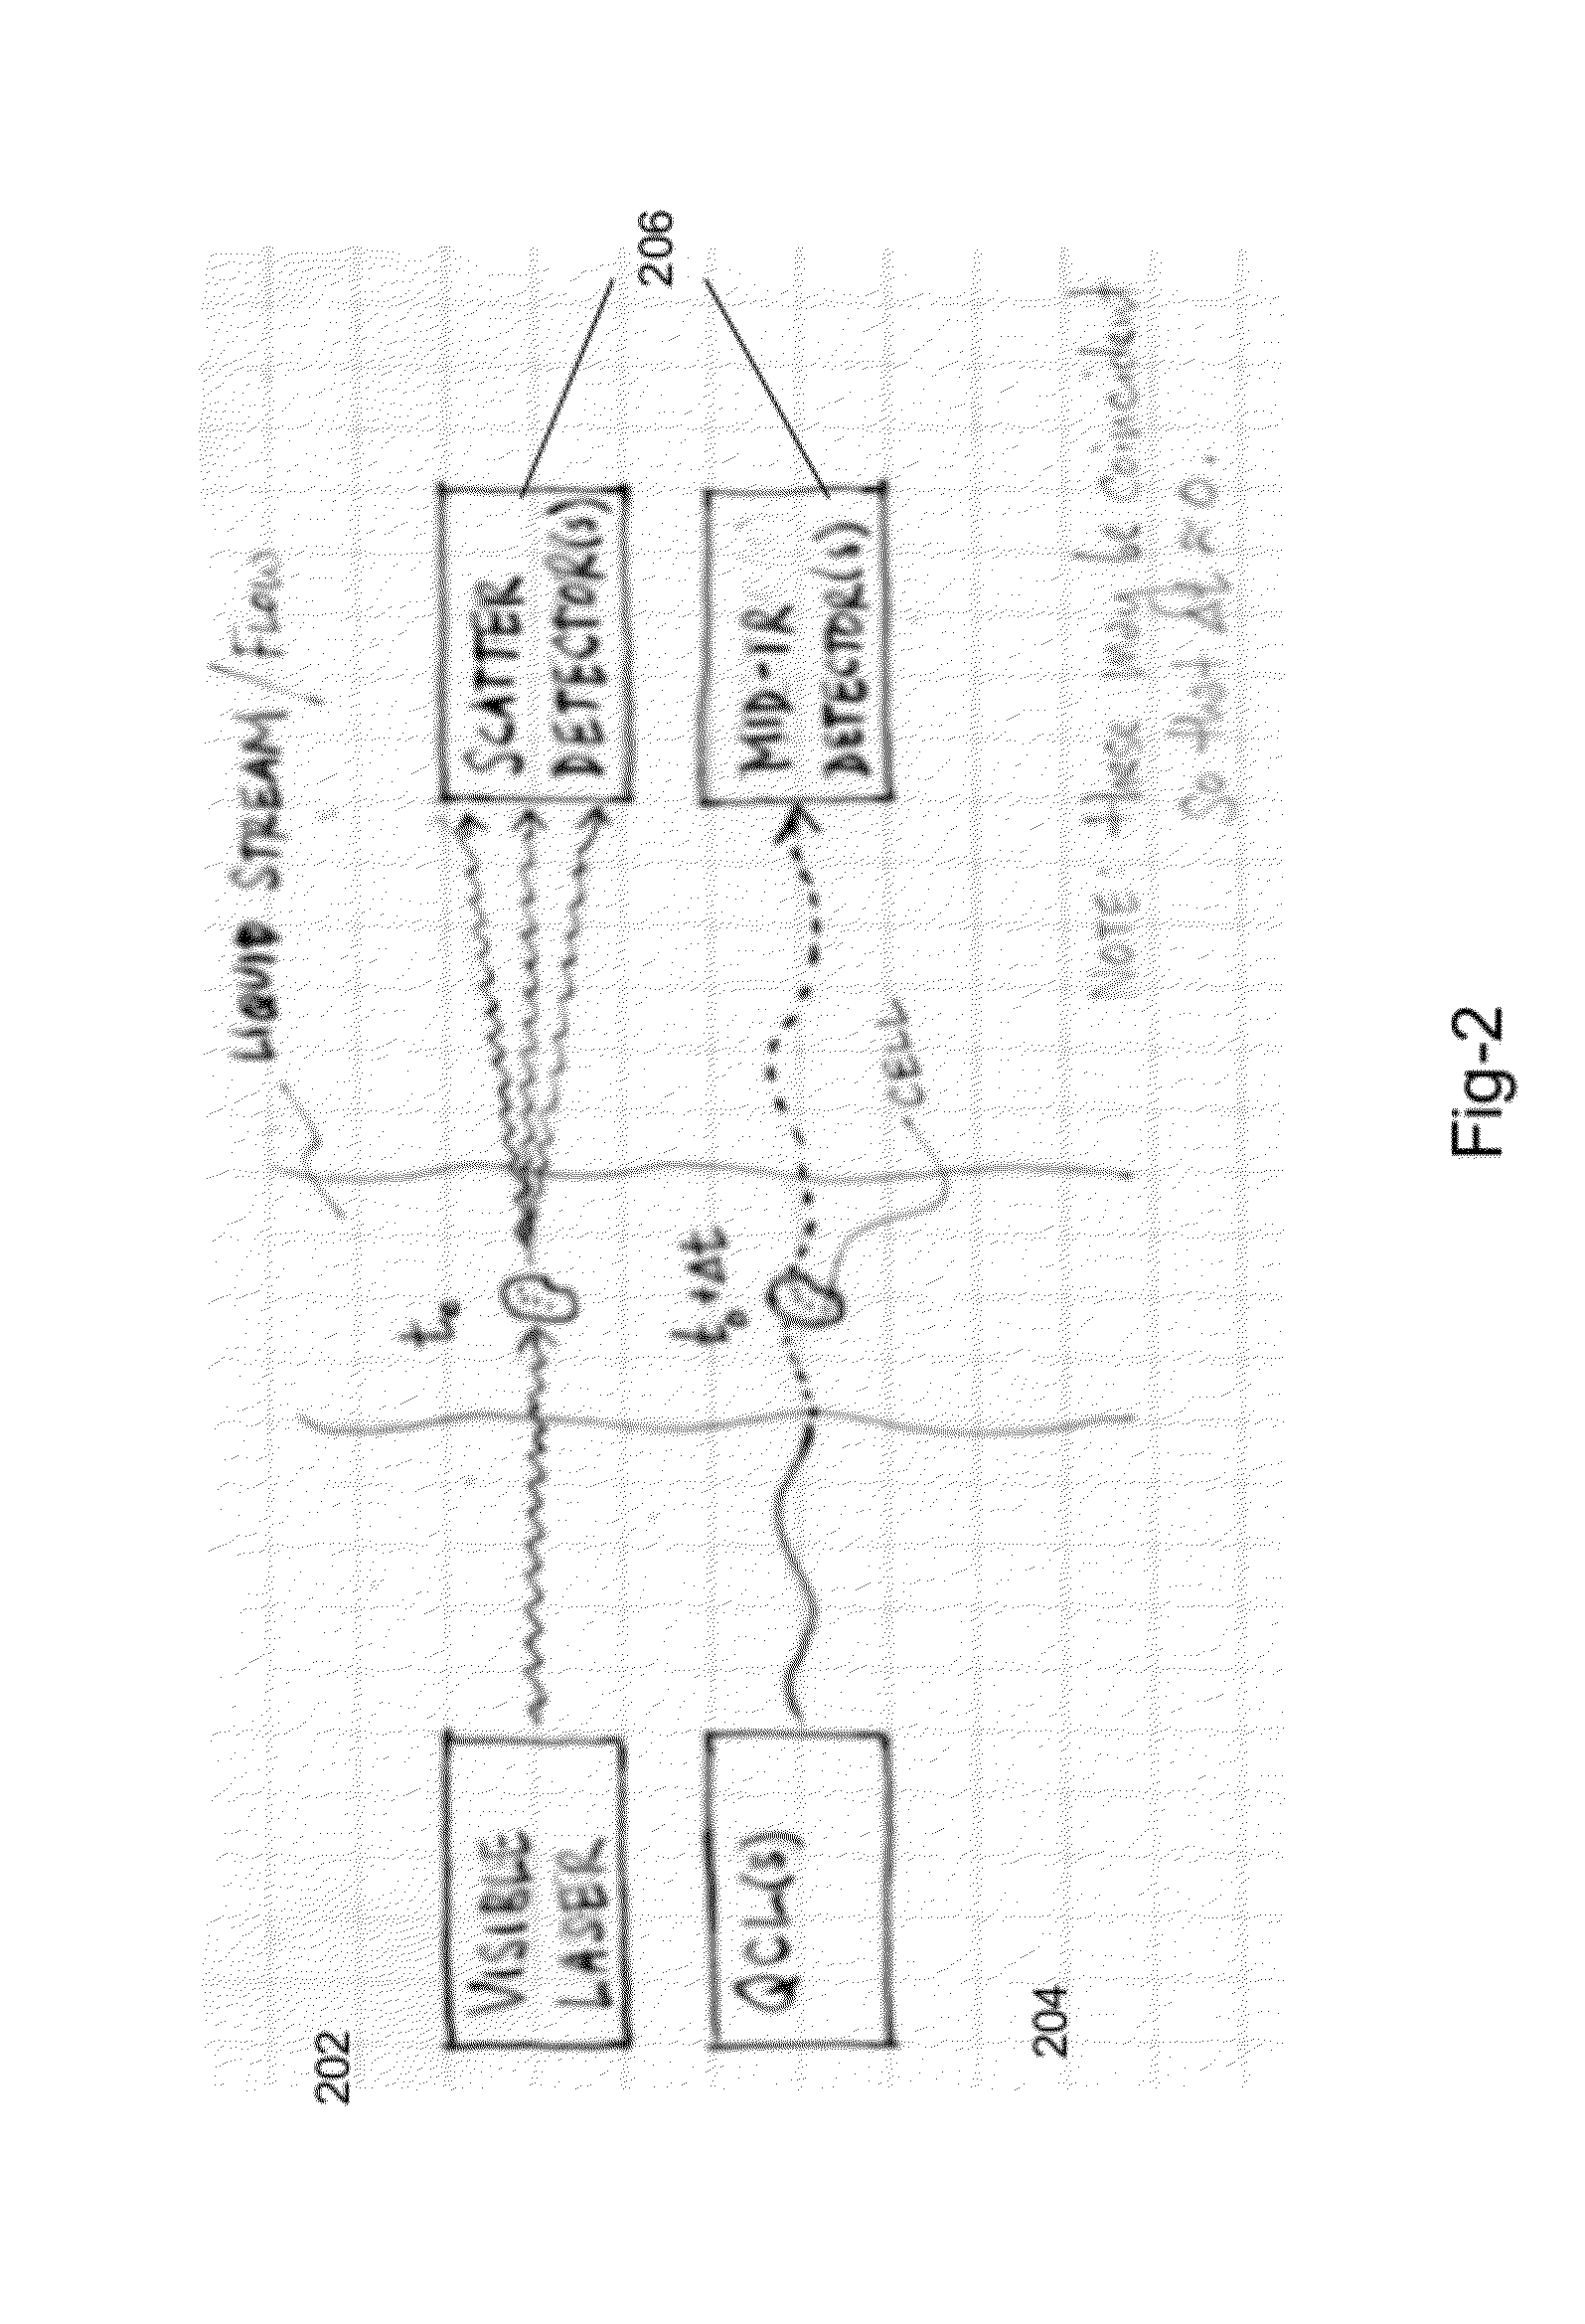 System for identifying and sorting living cells